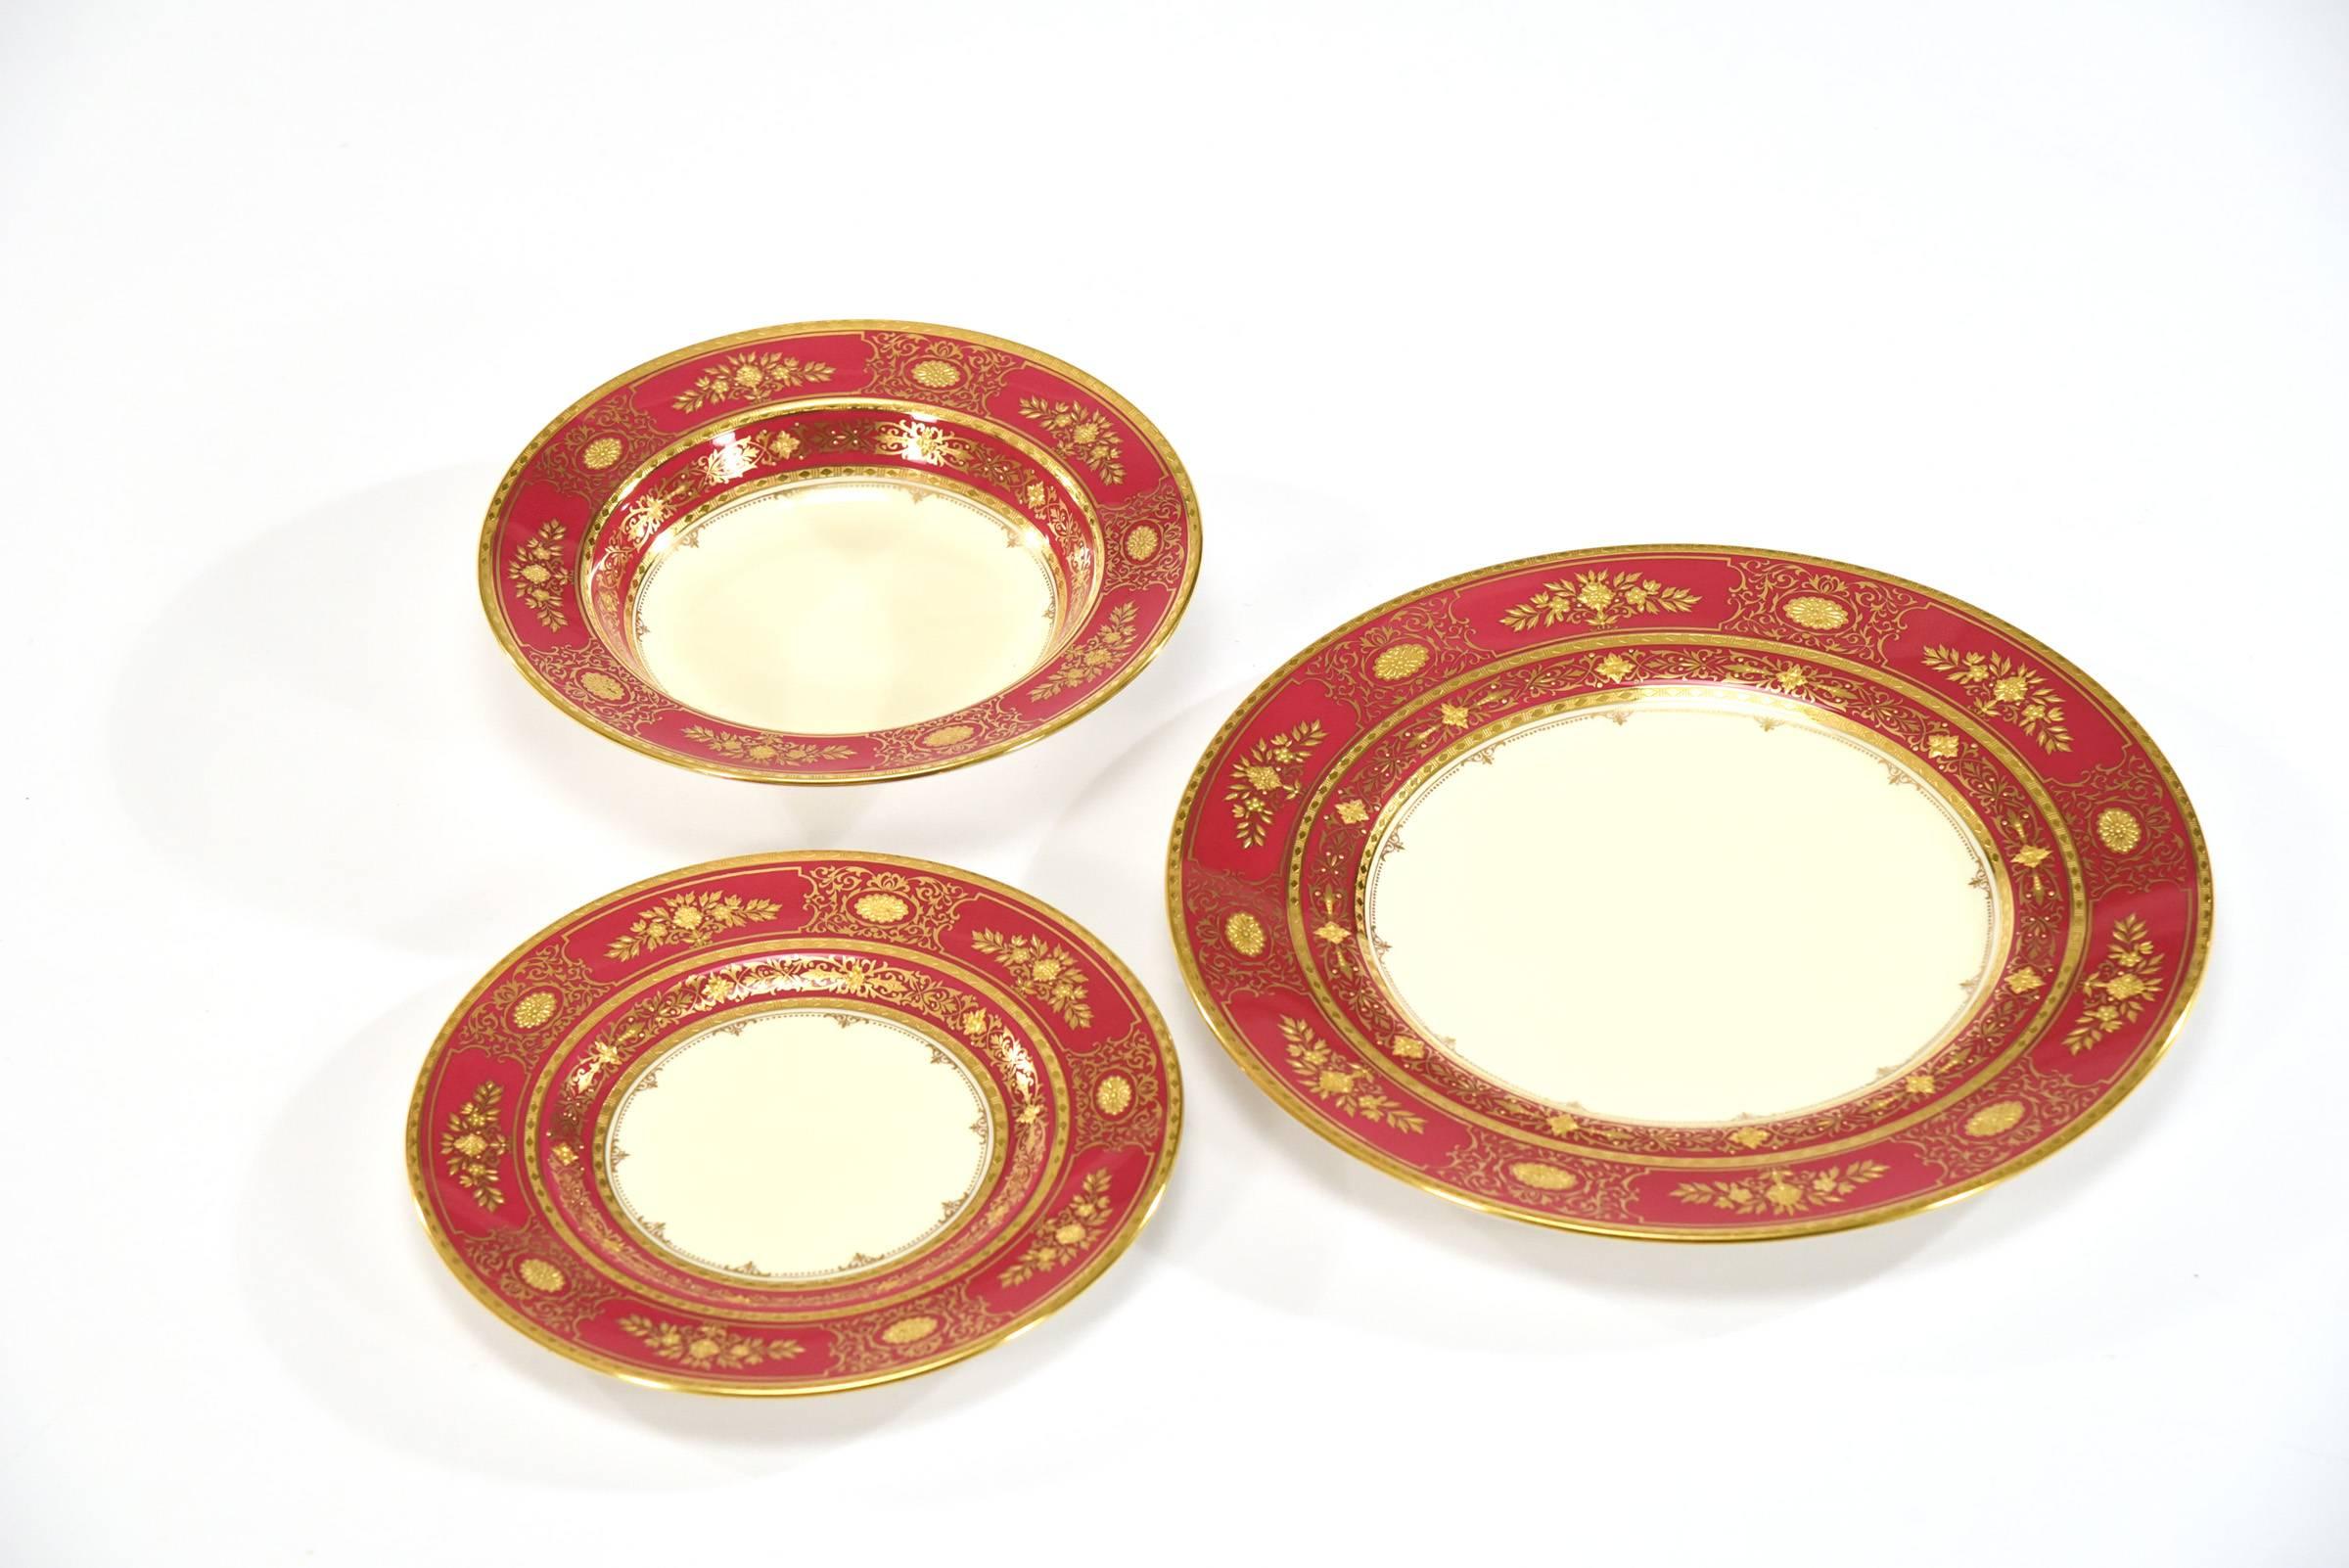 Neoclassical Minton for Tiffany Burgundy/Red & Raised Gold Dinner Service for 13-39 Pcs